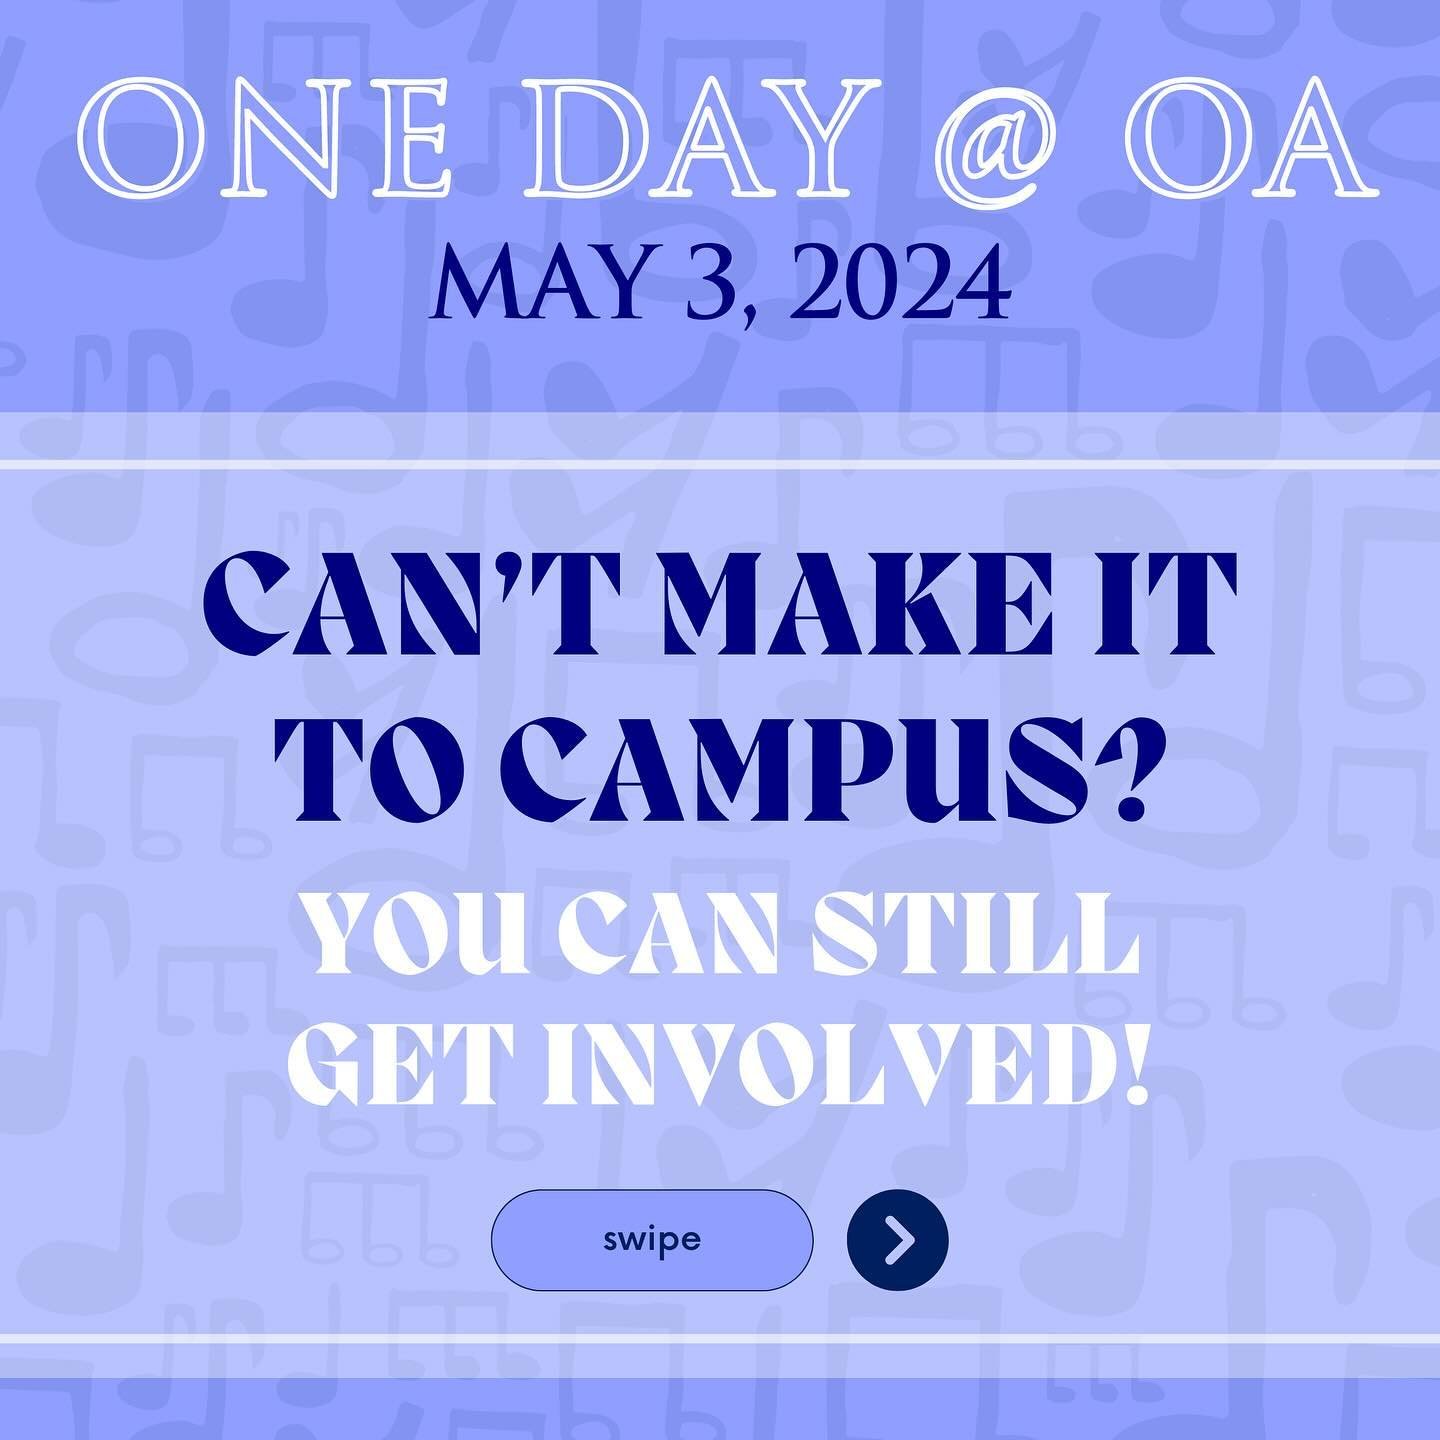 If you can&rsquo;t make it to campus on Friday, there are many ways you can still take part in our One Day @ OA! 

&bull; Take part in a Graduation class donor challenge throughout the day

&bull;&nbsp;Participate in OA Trivia via our Instagram story